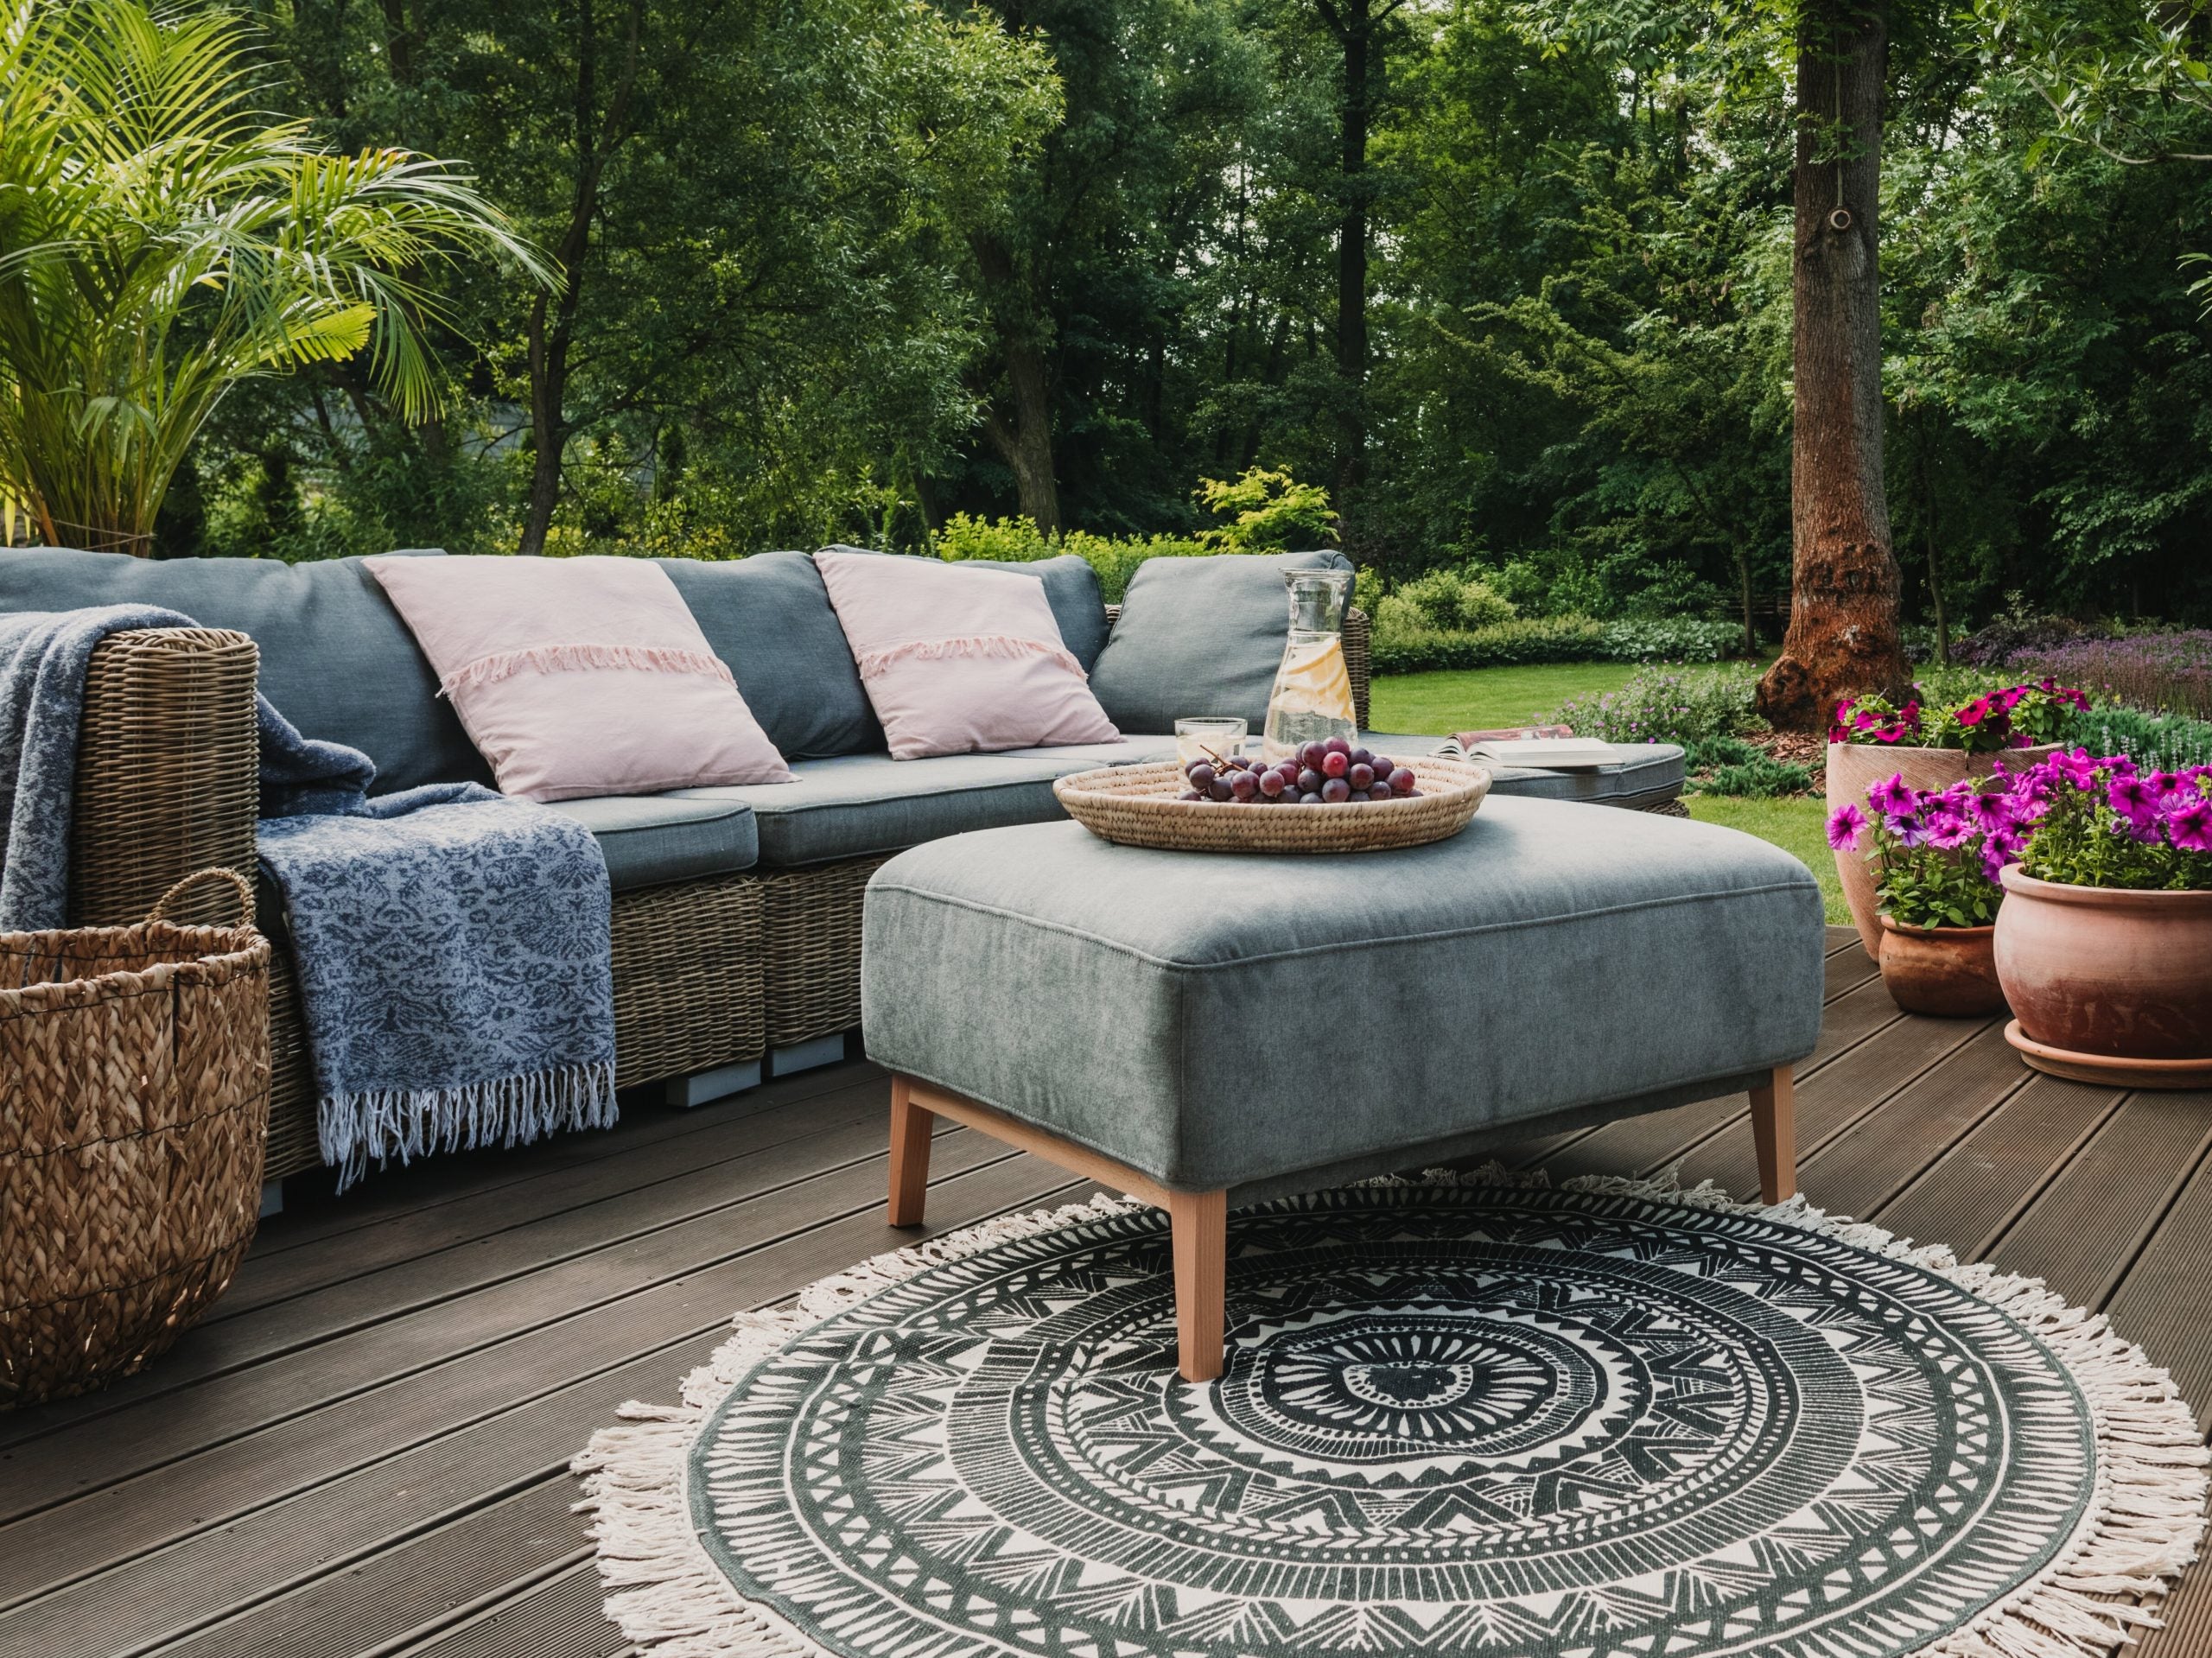 Amazon Big Spring Sale: The Best Deals On Patio Furniture